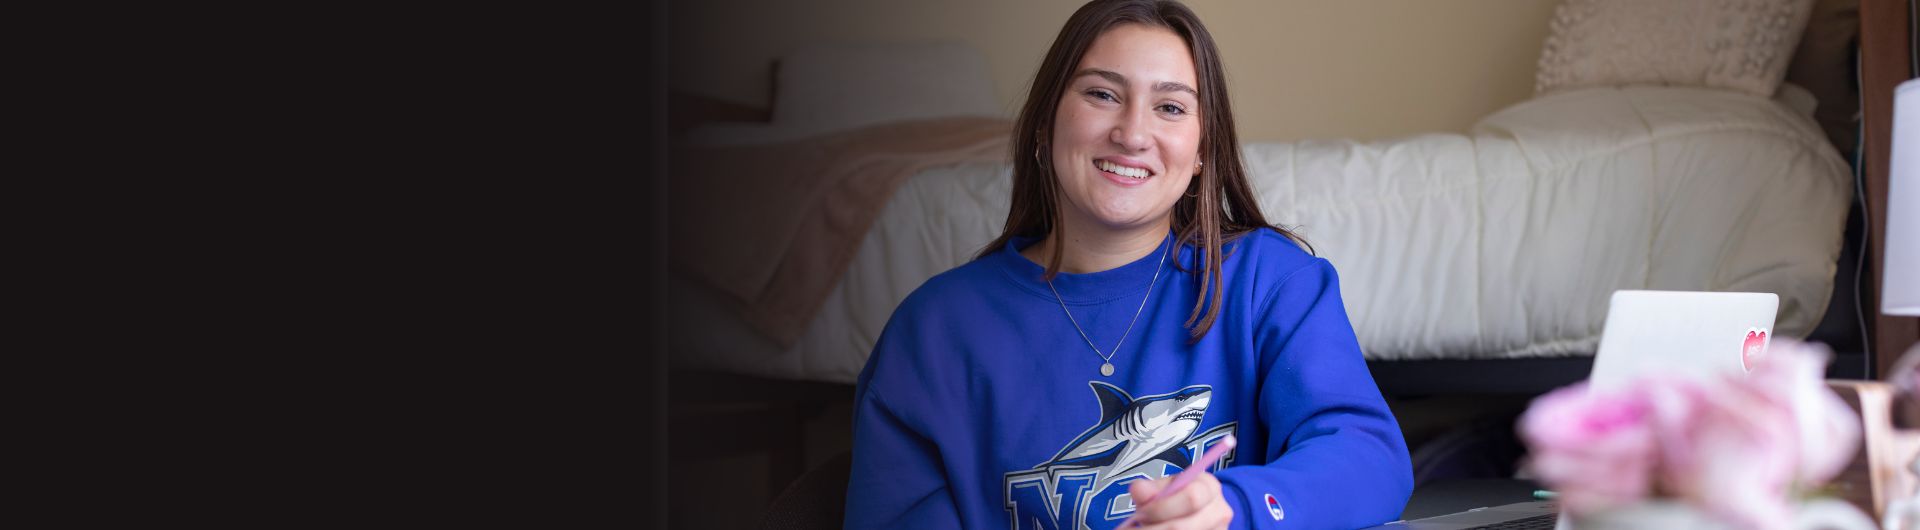 A student wearing an NSU shark shirt is writing on a notepad in her room with a bed in the background.